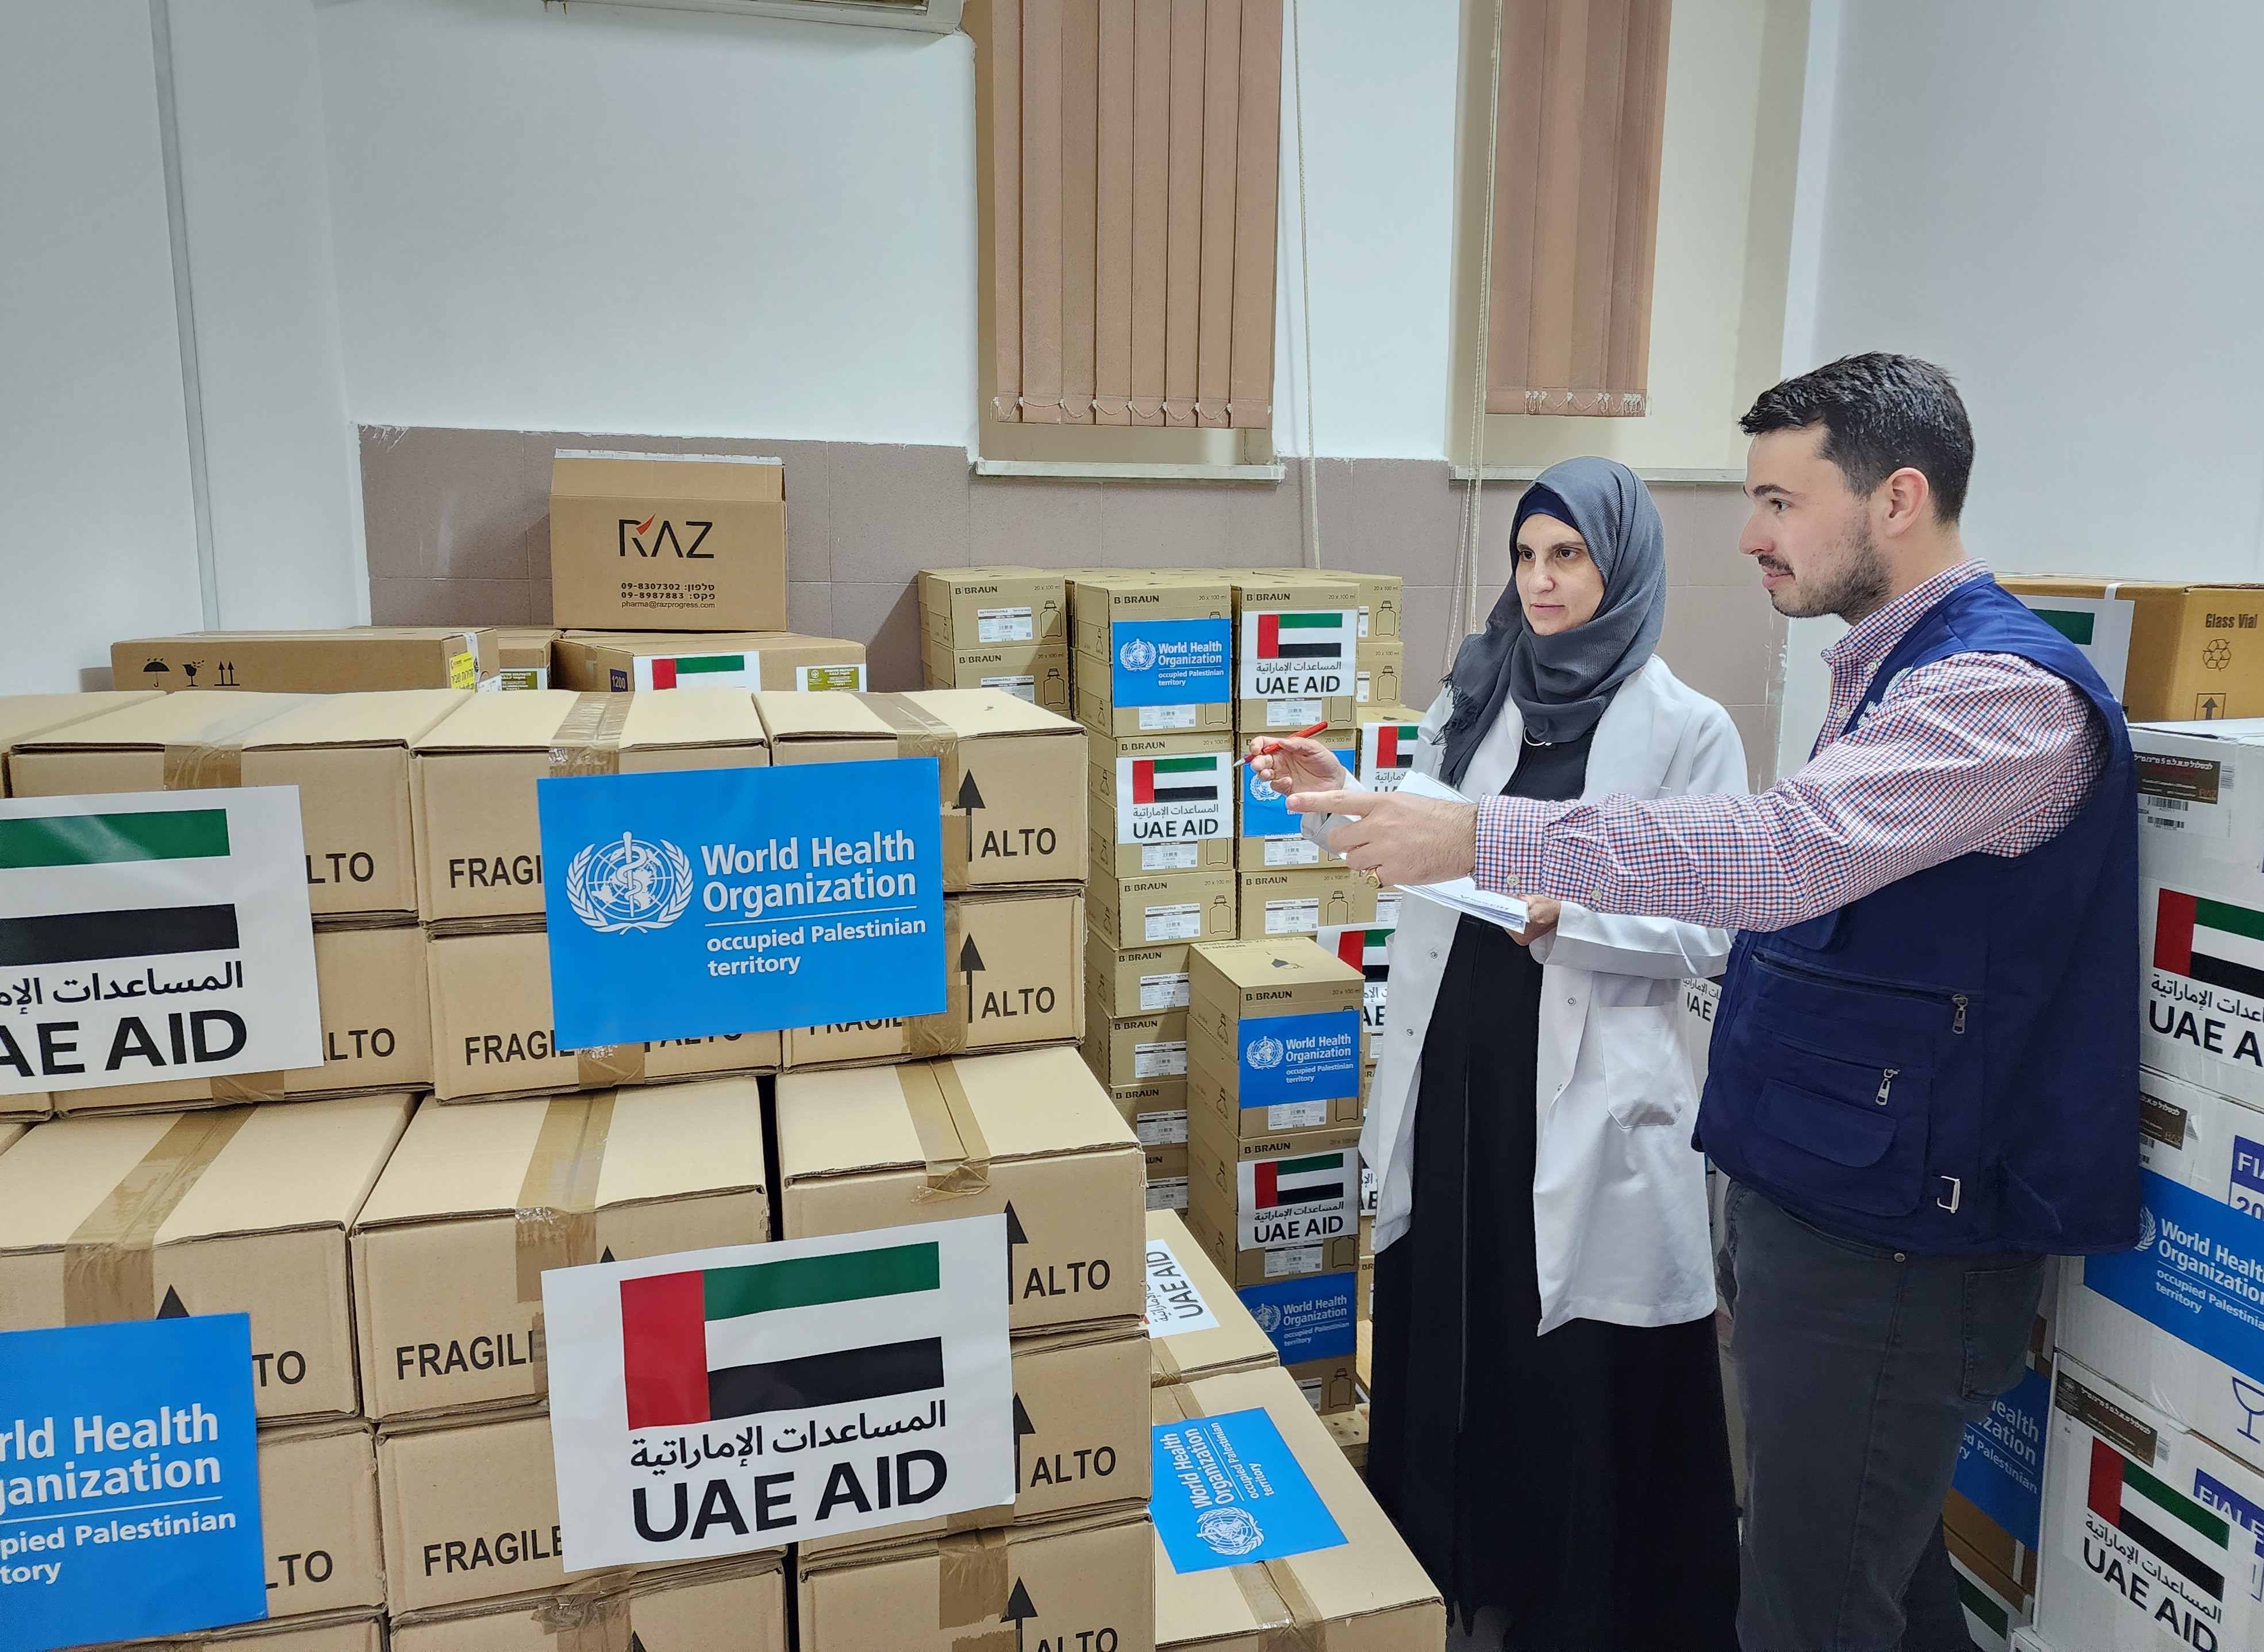 WHO delivers $1.5M of medicines and supplies to Al-Makassed Hospital through UAE Aid support